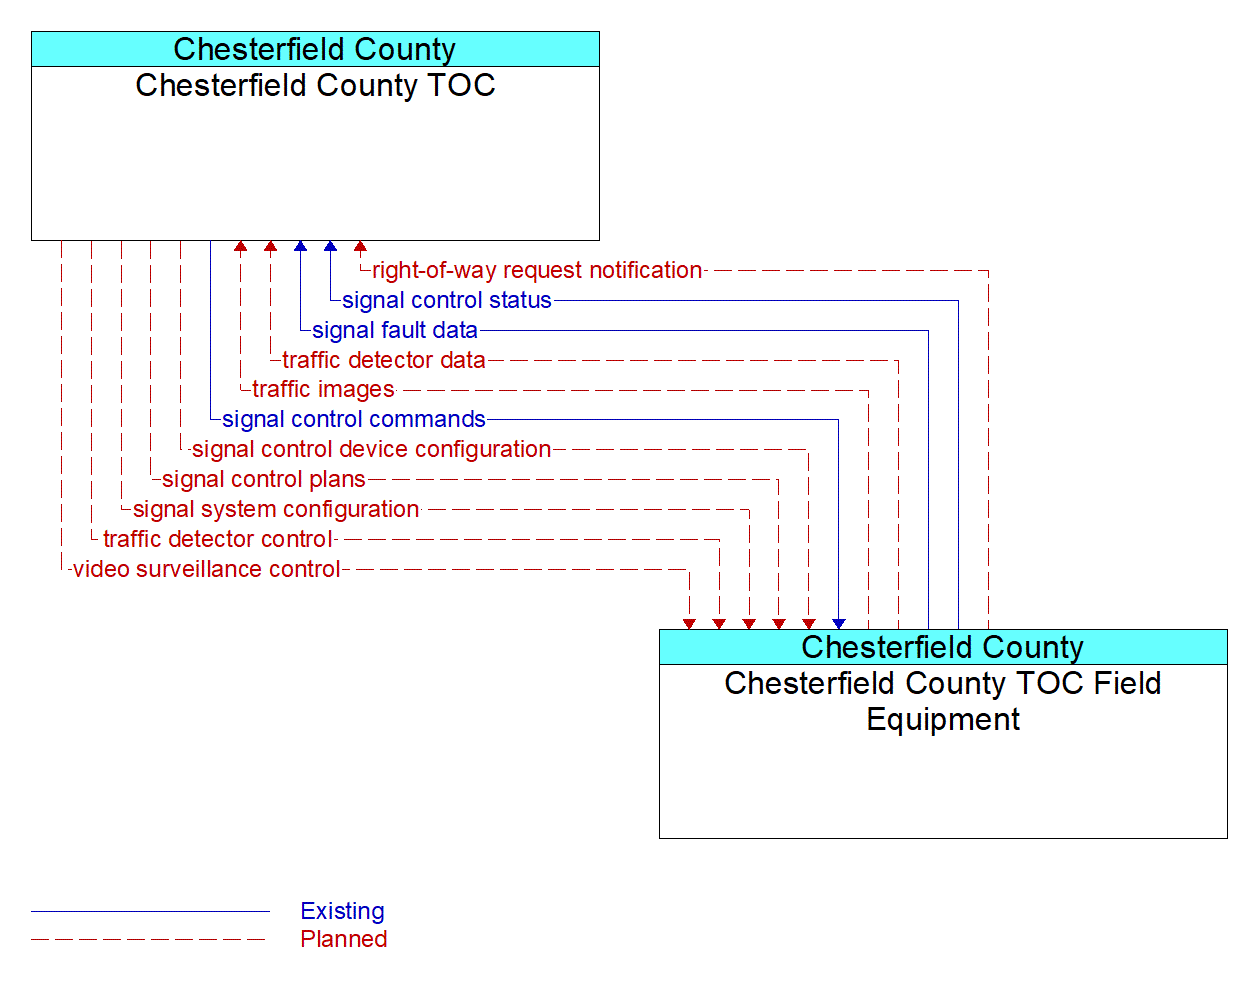 Architecture Flow Diagram: Chesterfield County TOC Field Equipment <--> Chesterfield County TOC